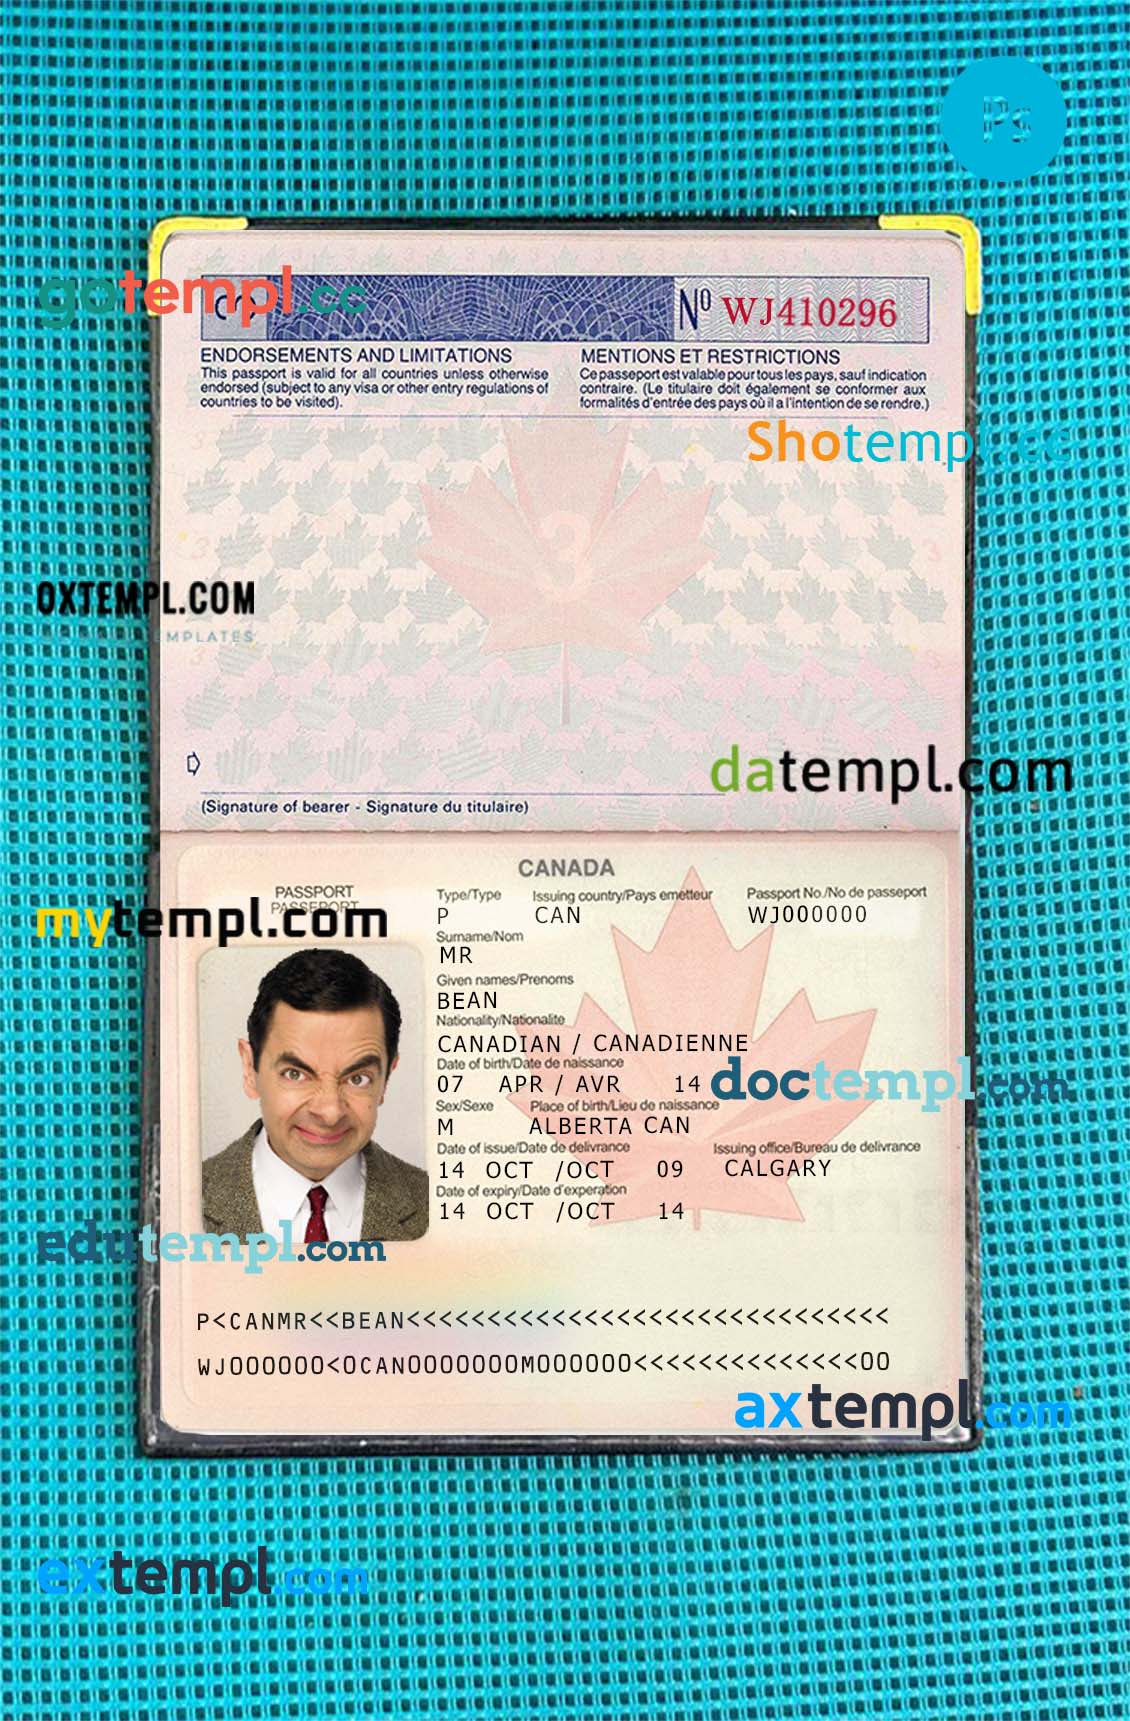 India passport editable PSDs, scan and photo-realistic snapshot (2013-present), 2 in 1